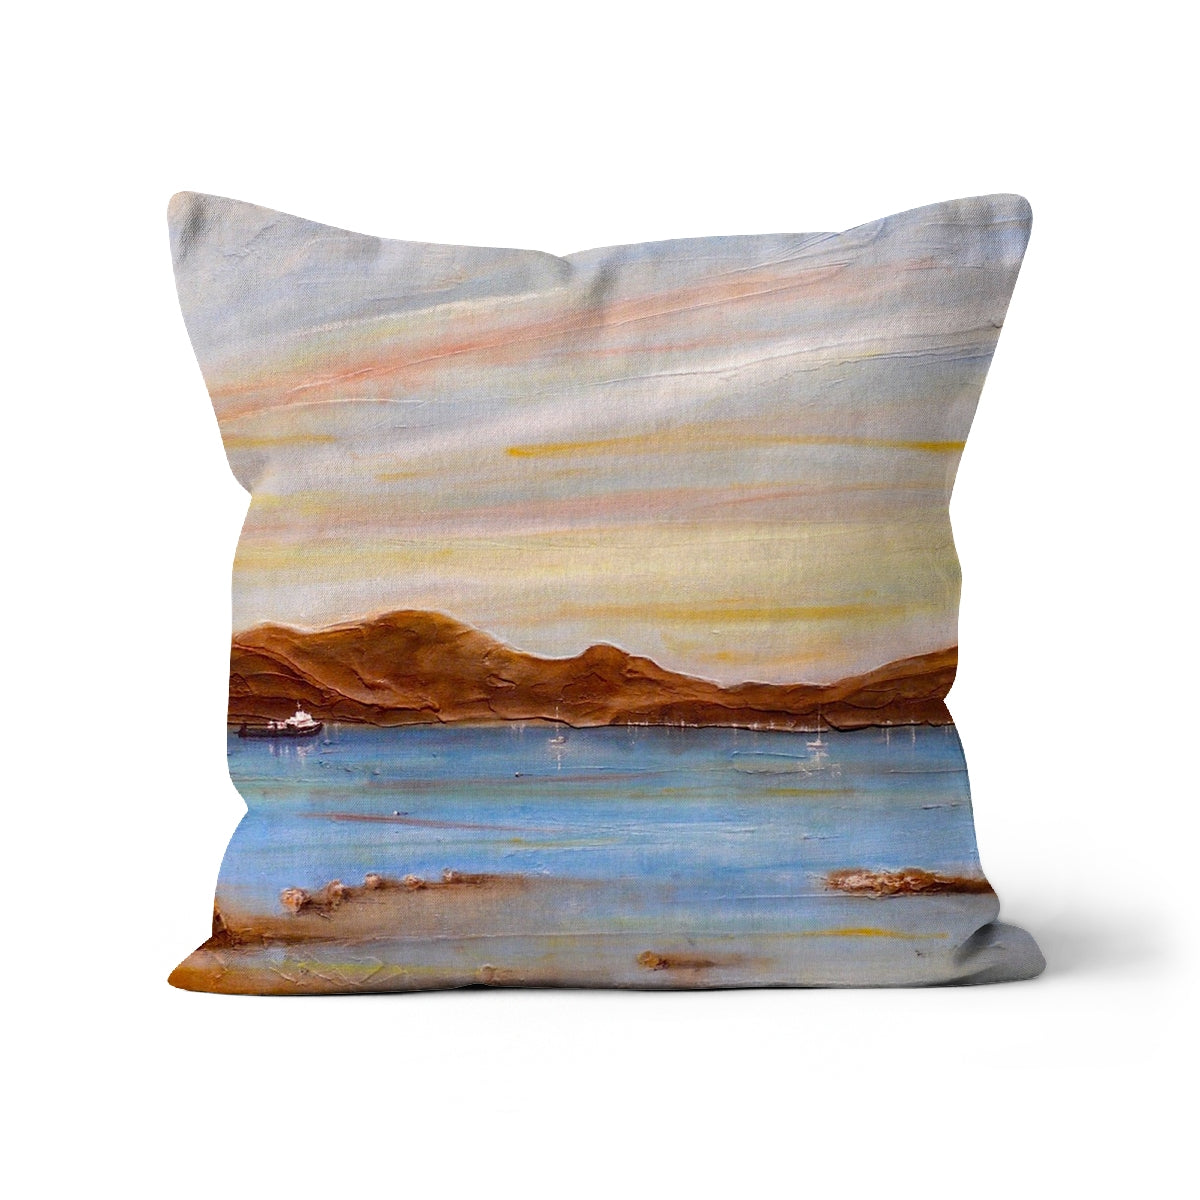 The Last Ferry To Dunoon Art Gifts Cushion-Cushions-River Clyde Art Gallery-Canvas-18"x18"-Paintings, Prints, Homeware, Art Gifts From Scotland By Scottish Artist Kevin Hunter